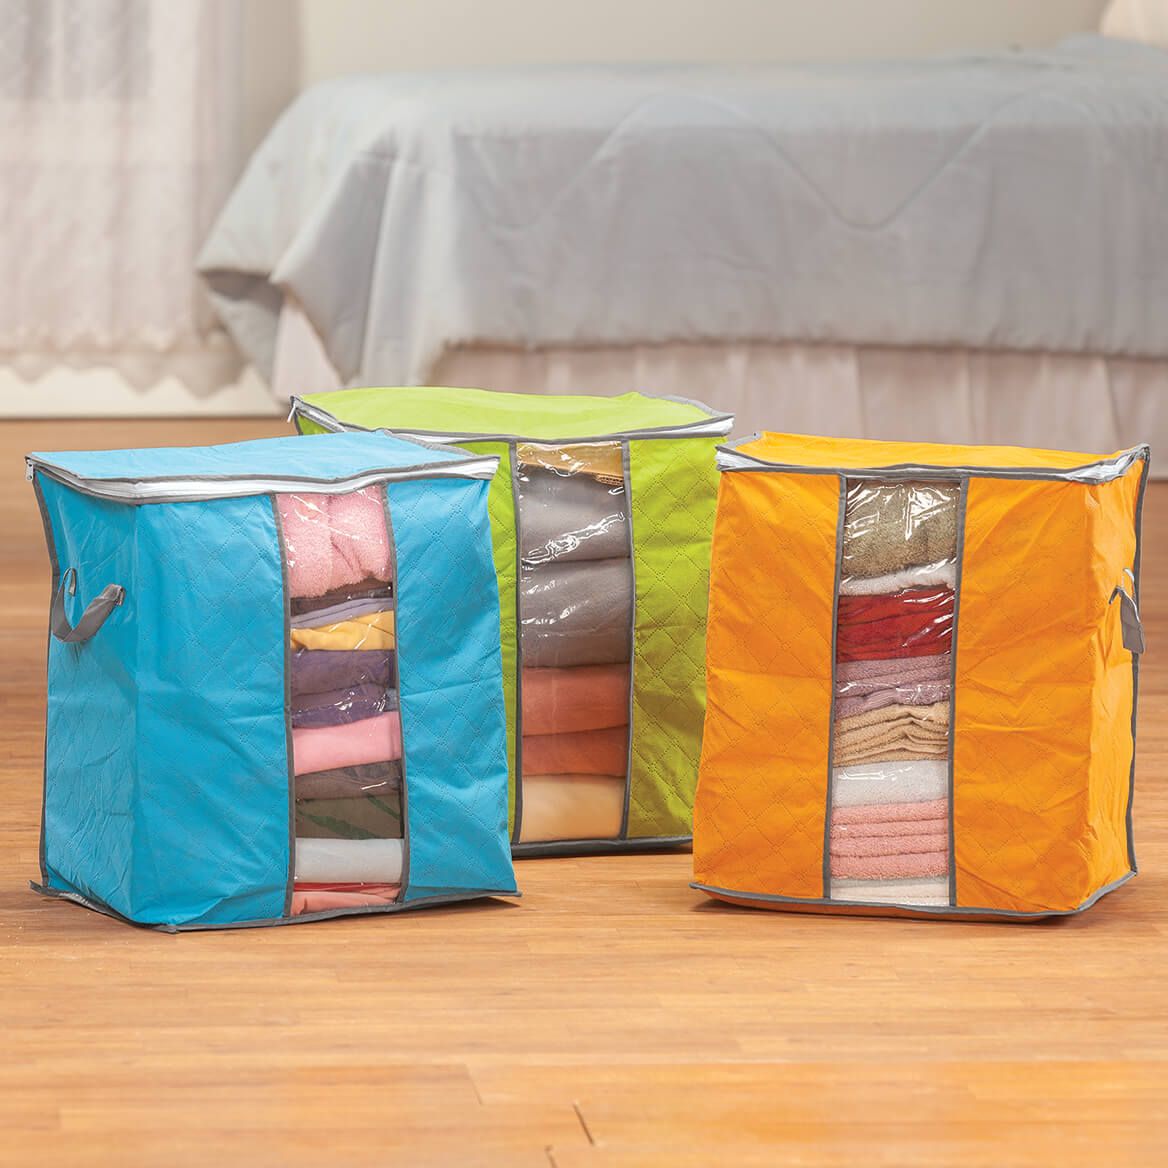 Anti-Dust Quilted Clothes Organizers, Set of 3 + '-' + 369588